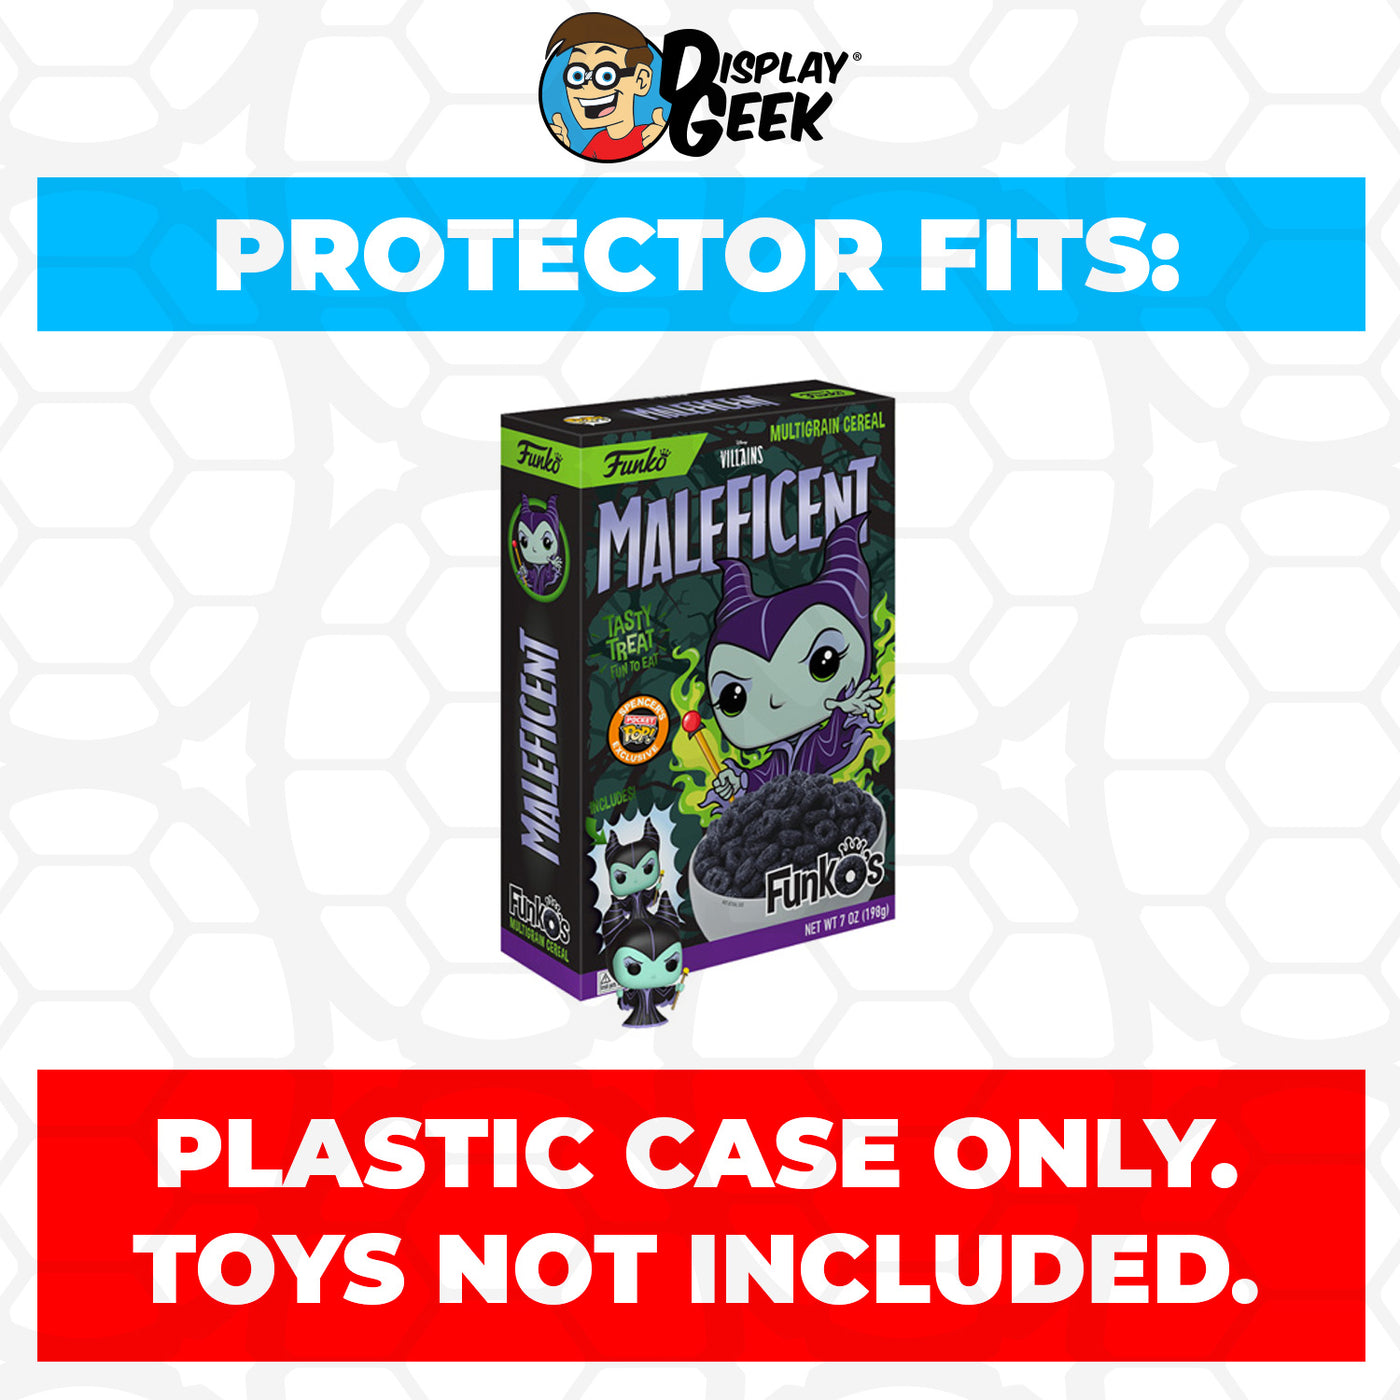 Pop Protector for Maleficent FunkO's Cereal Box on The Protector Guide App by Display Geek